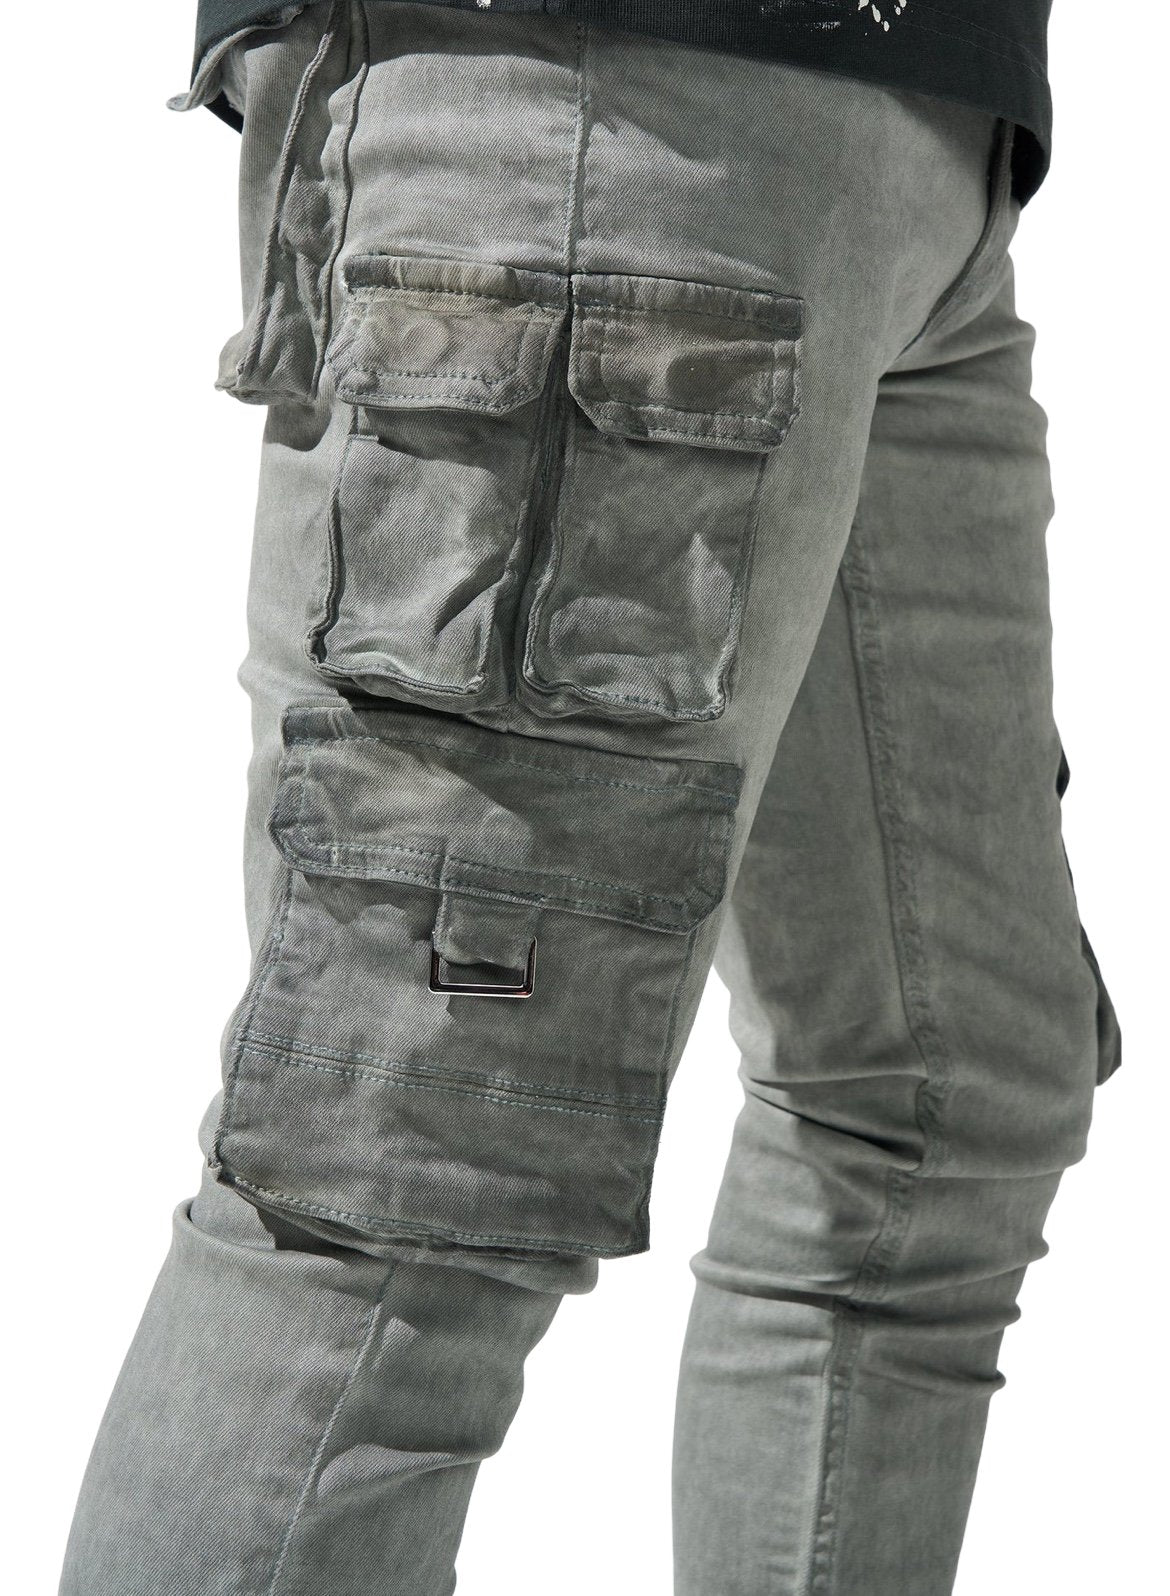 Close-up of a person wearing SERENEDE TIMBER WOLF ARTIC GREY cargo pants with multiple pockets and a buckle detail, showing only the midsection and legs.